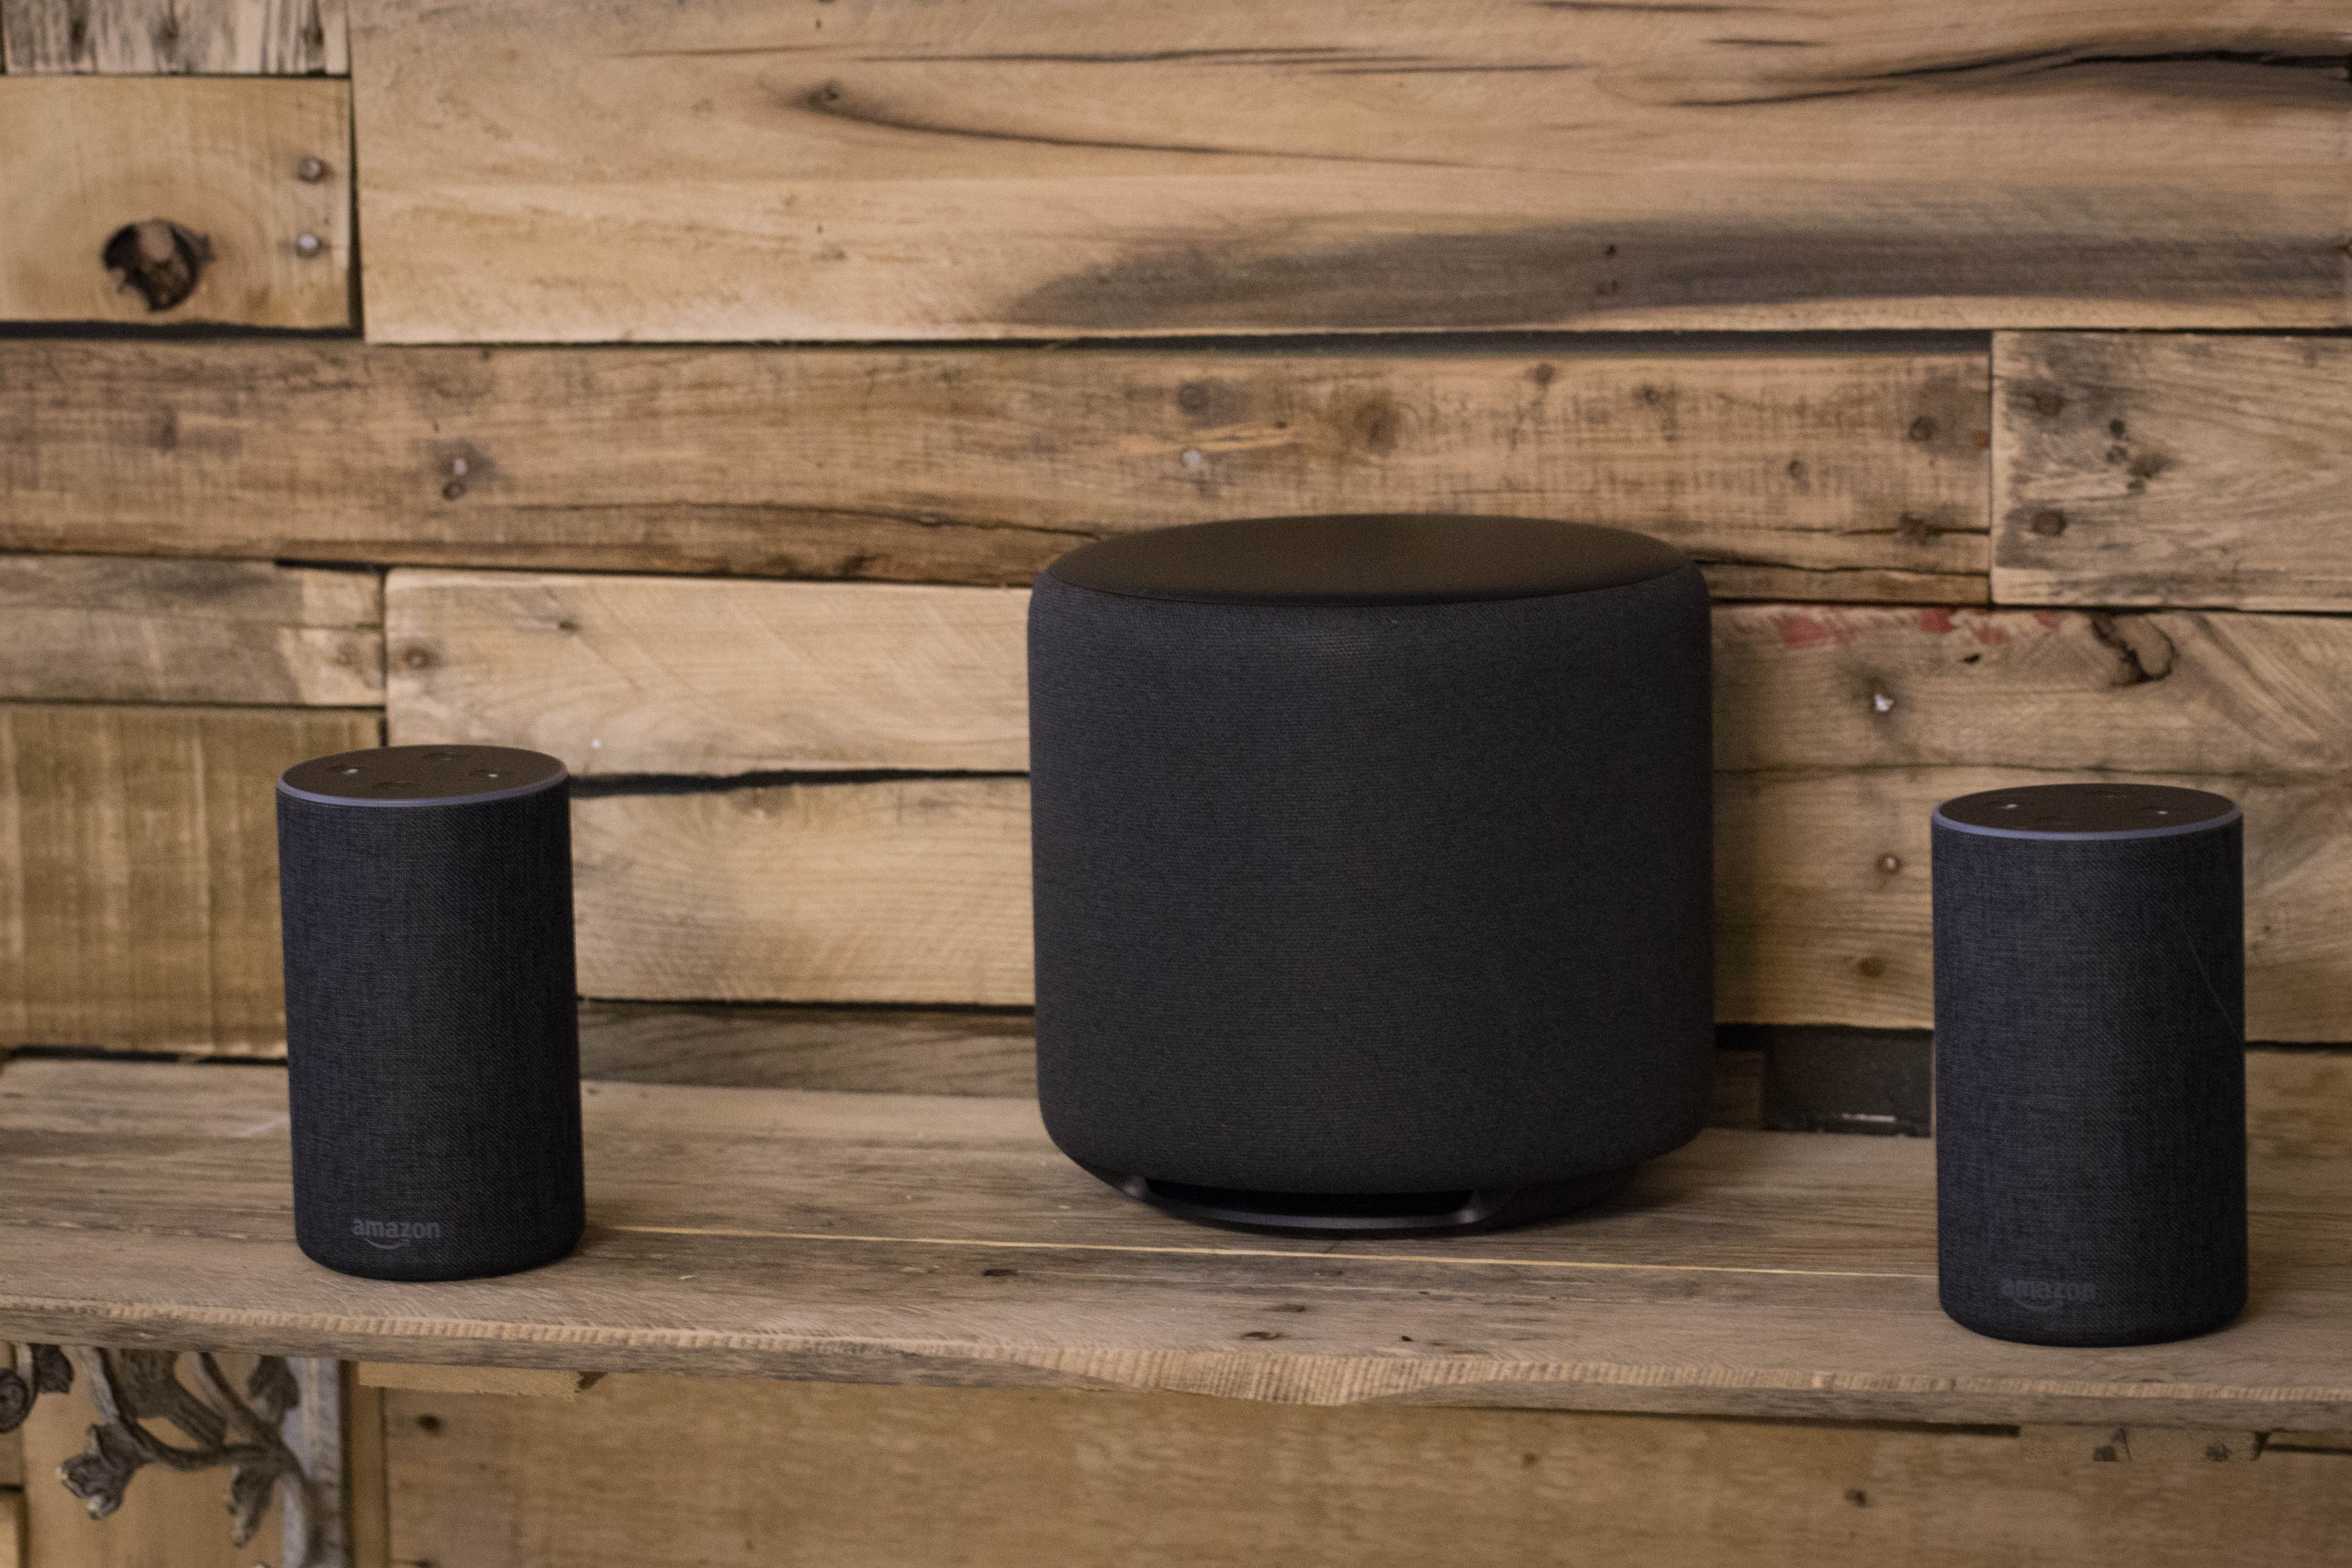 Review: The tiny $129 Echo Sub is a huge audio upgrade | TechCrunch